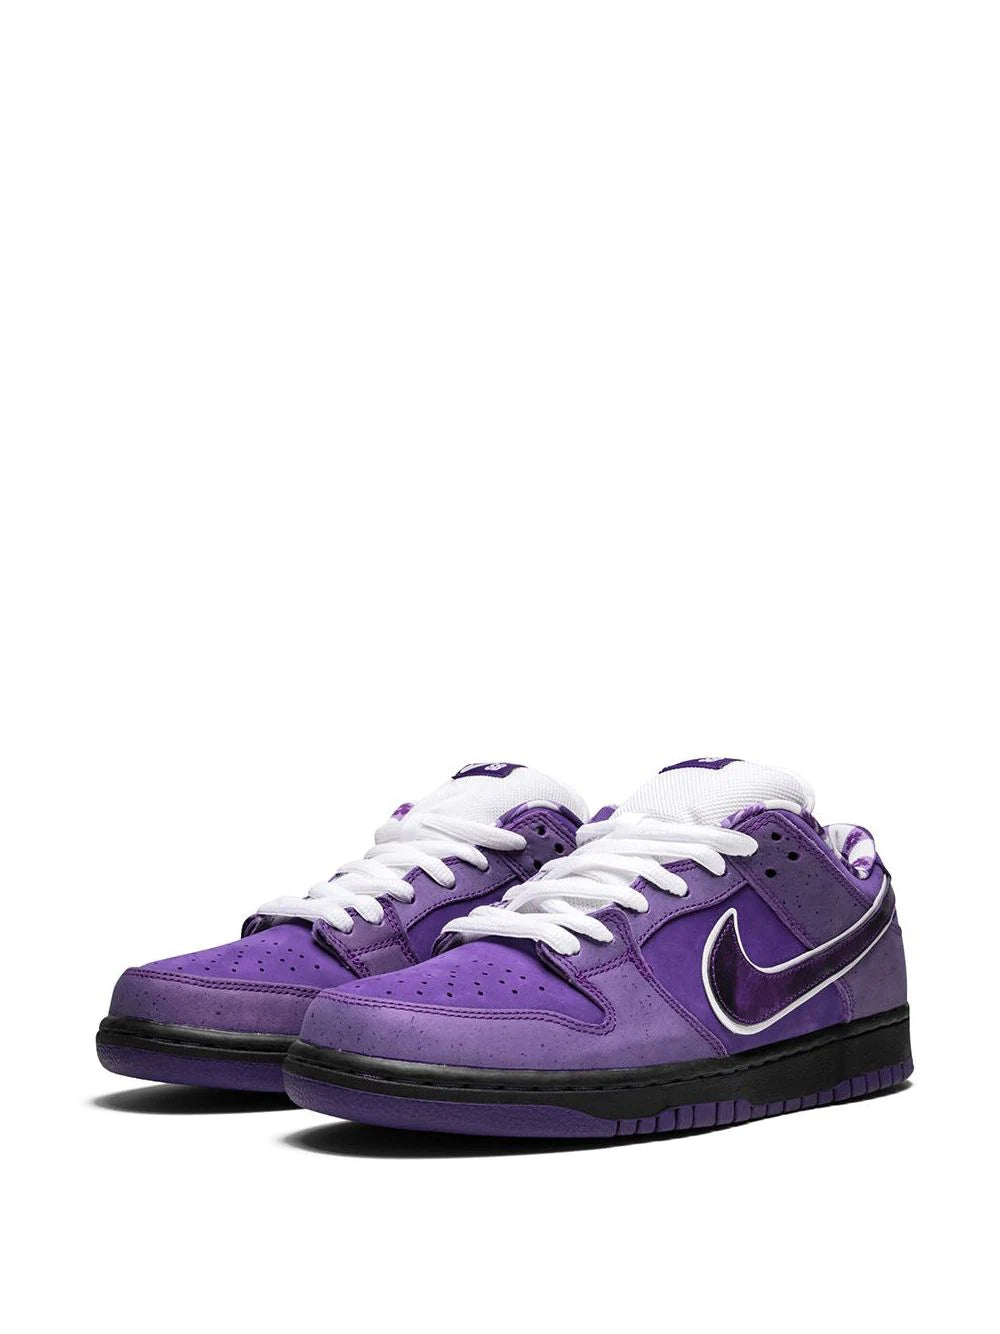 NIKE DUNK LOW - SB CONCEPTS PURPLE LOBSTER